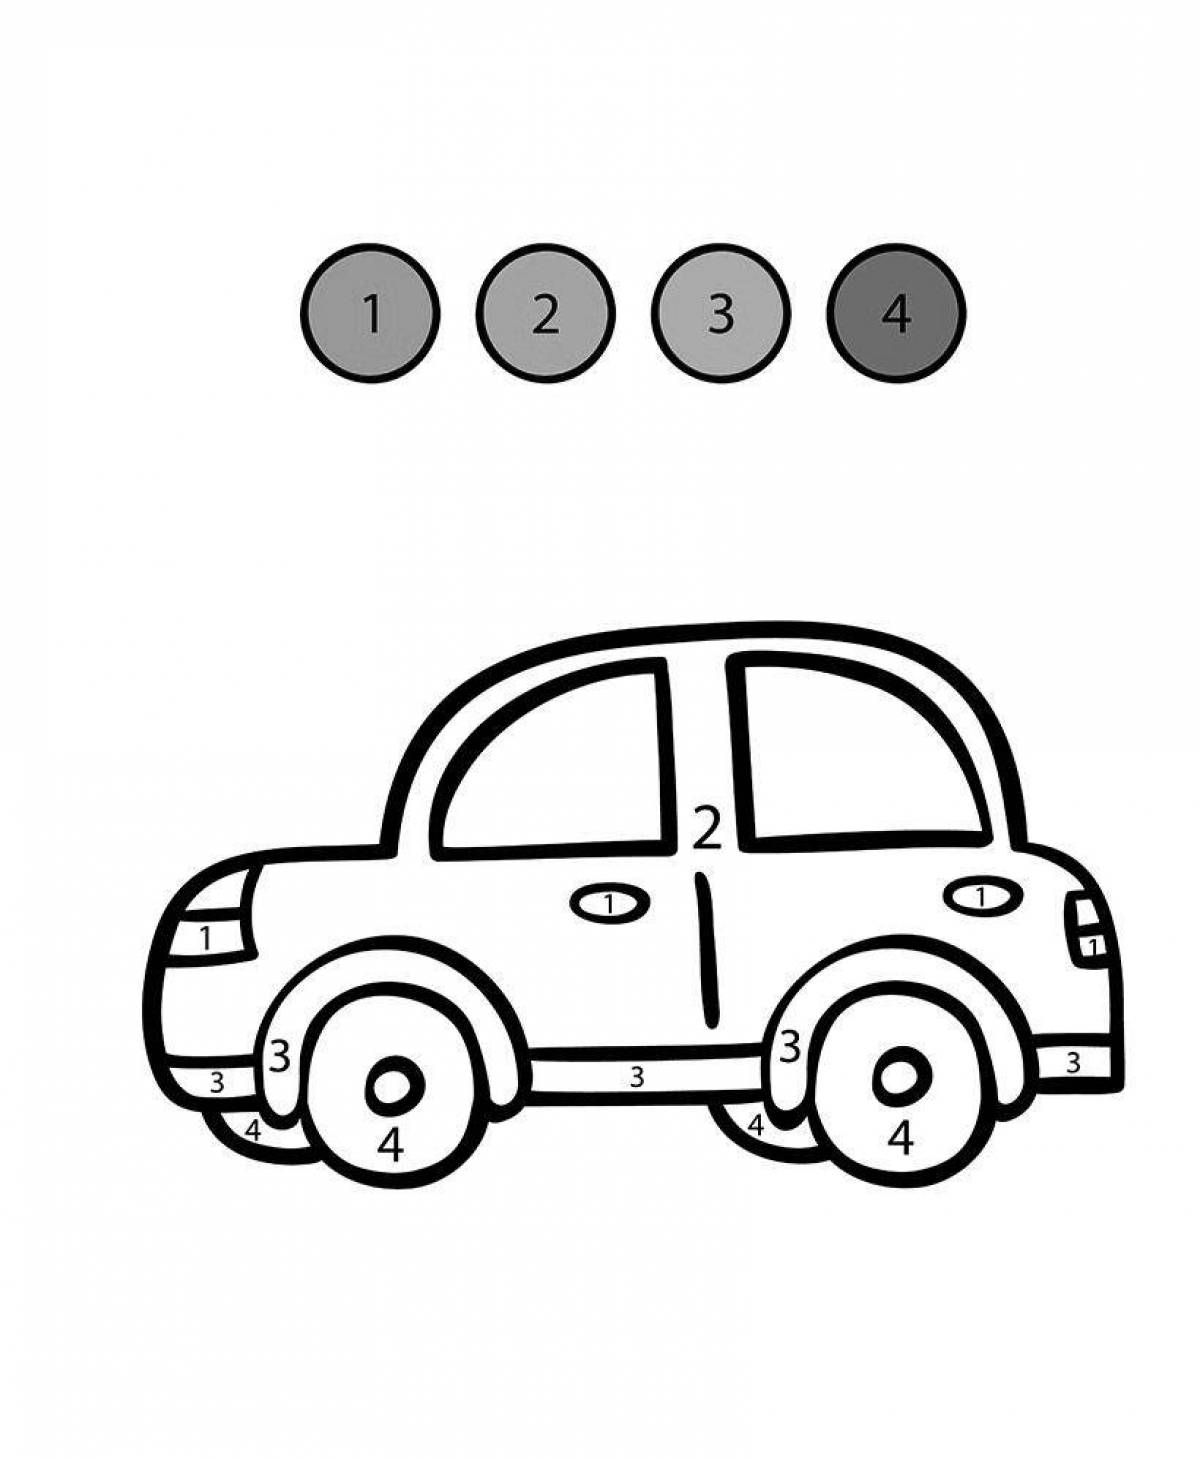 Charming cars by numbers coloring book